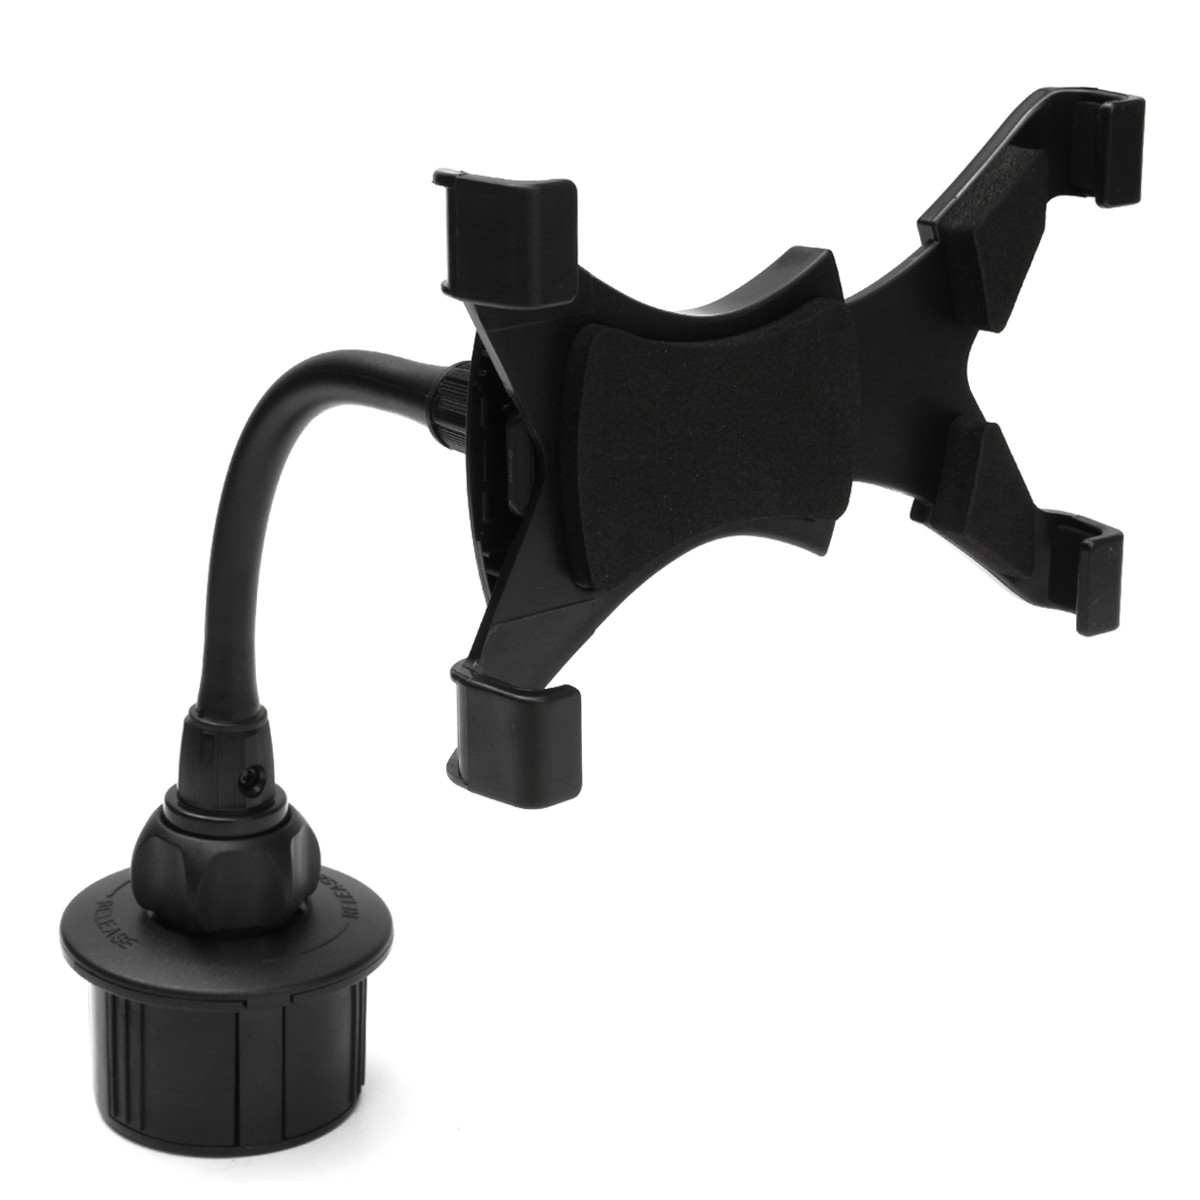 Adjustable-Bendy-Car-Cup-Holder-Mount-for-7-Inch-to-10-Inch-Tablet-1115144-5